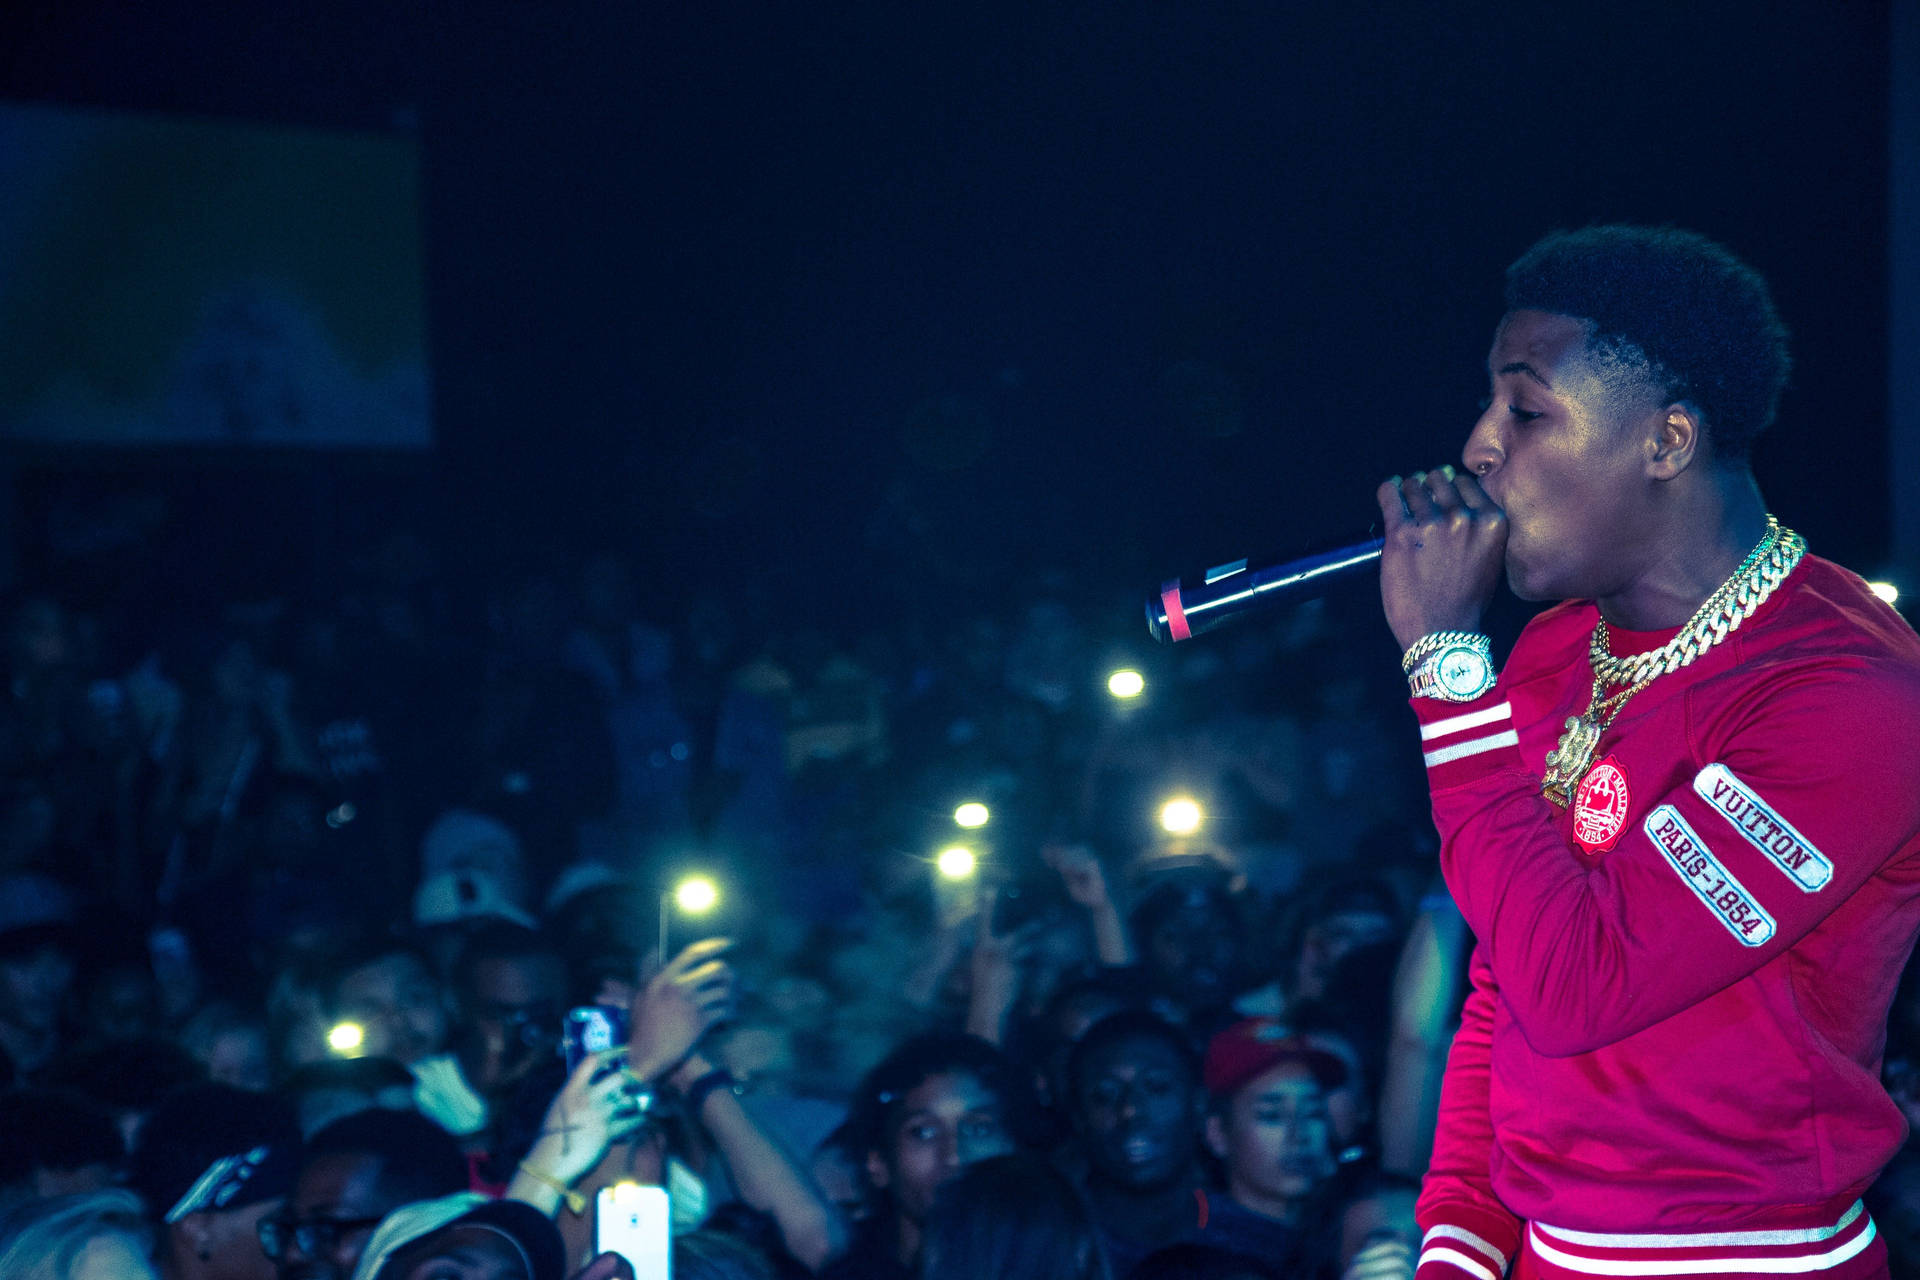 NBA Youngboy performs onstage in front of an excited crowd Wallpaper